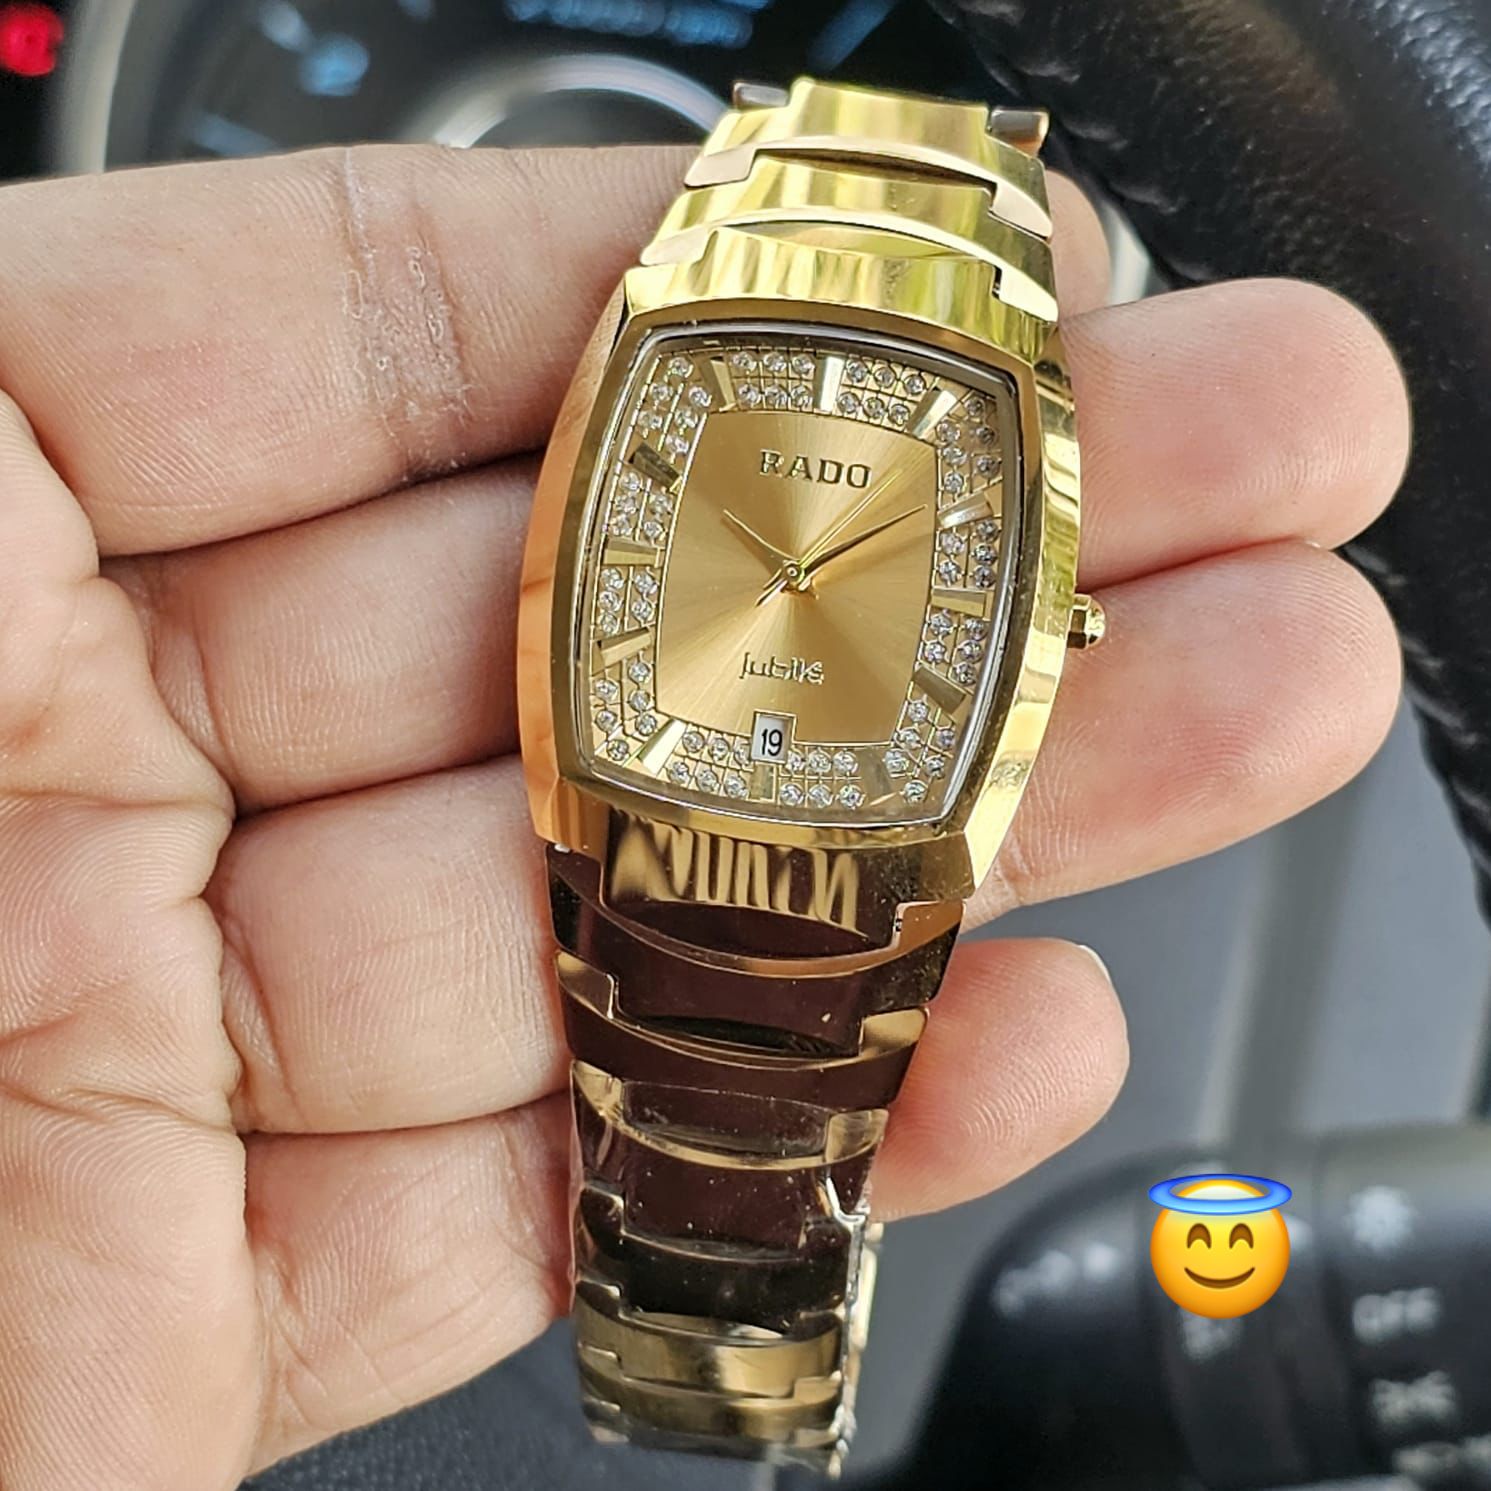 Rado Old Is Gold Watch